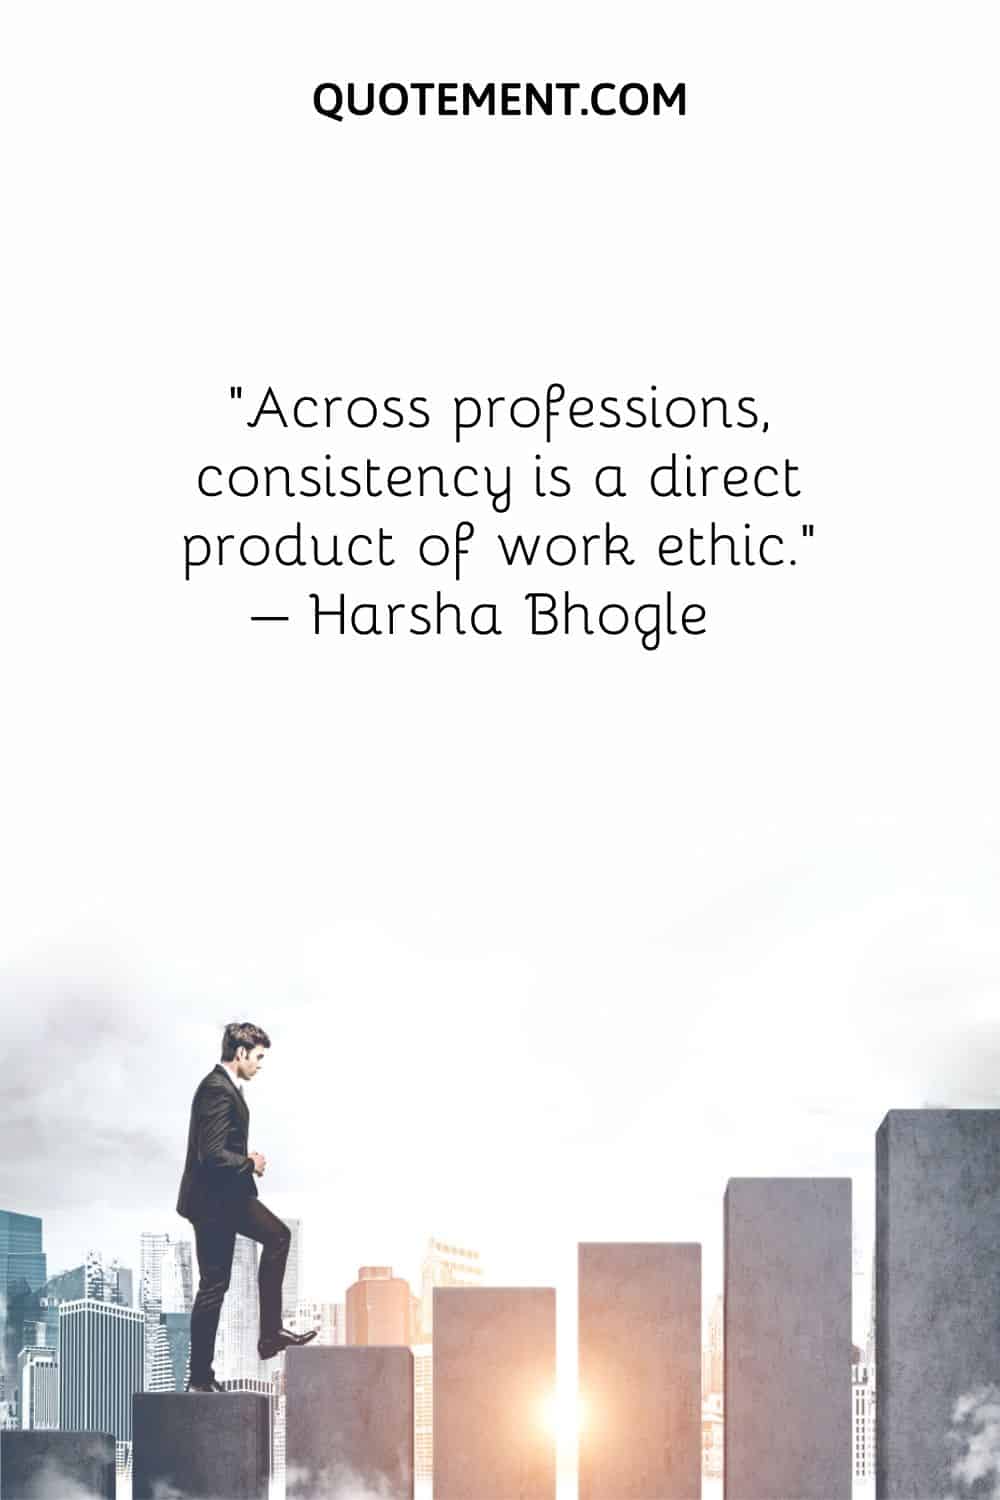 Across professions, consistency is a direct product of work ethic